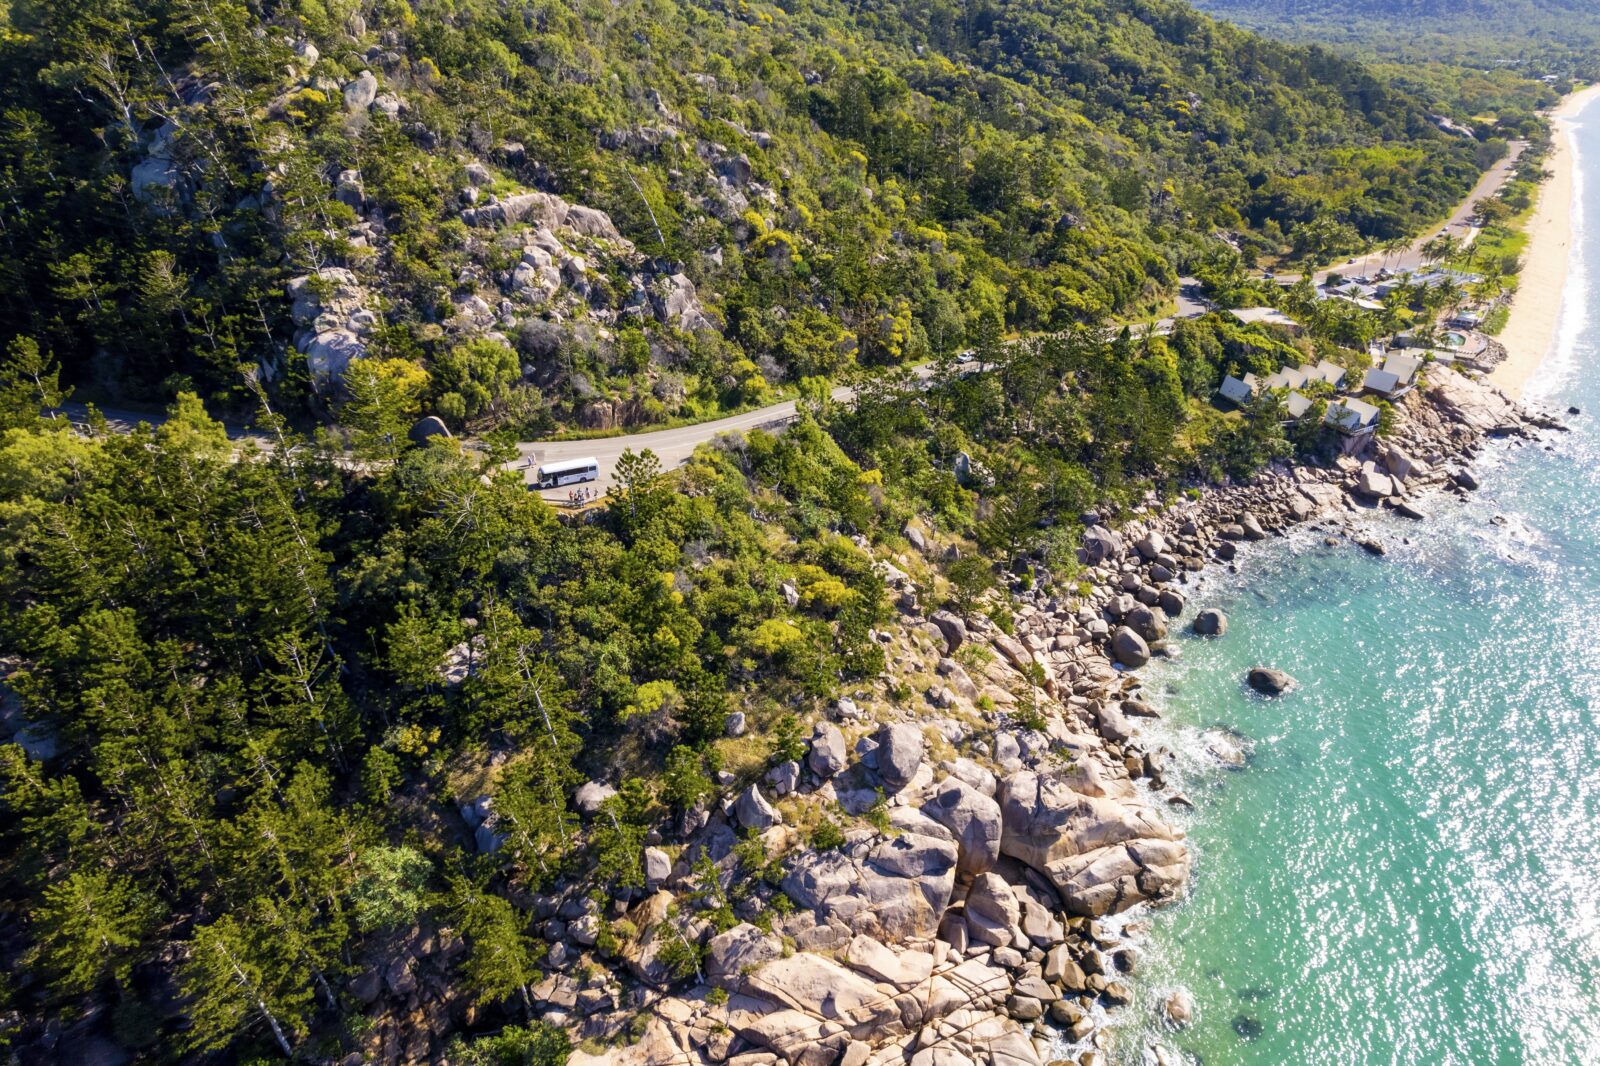 Drone shot of tour bus travelling a mountainside road, overlooking oceans